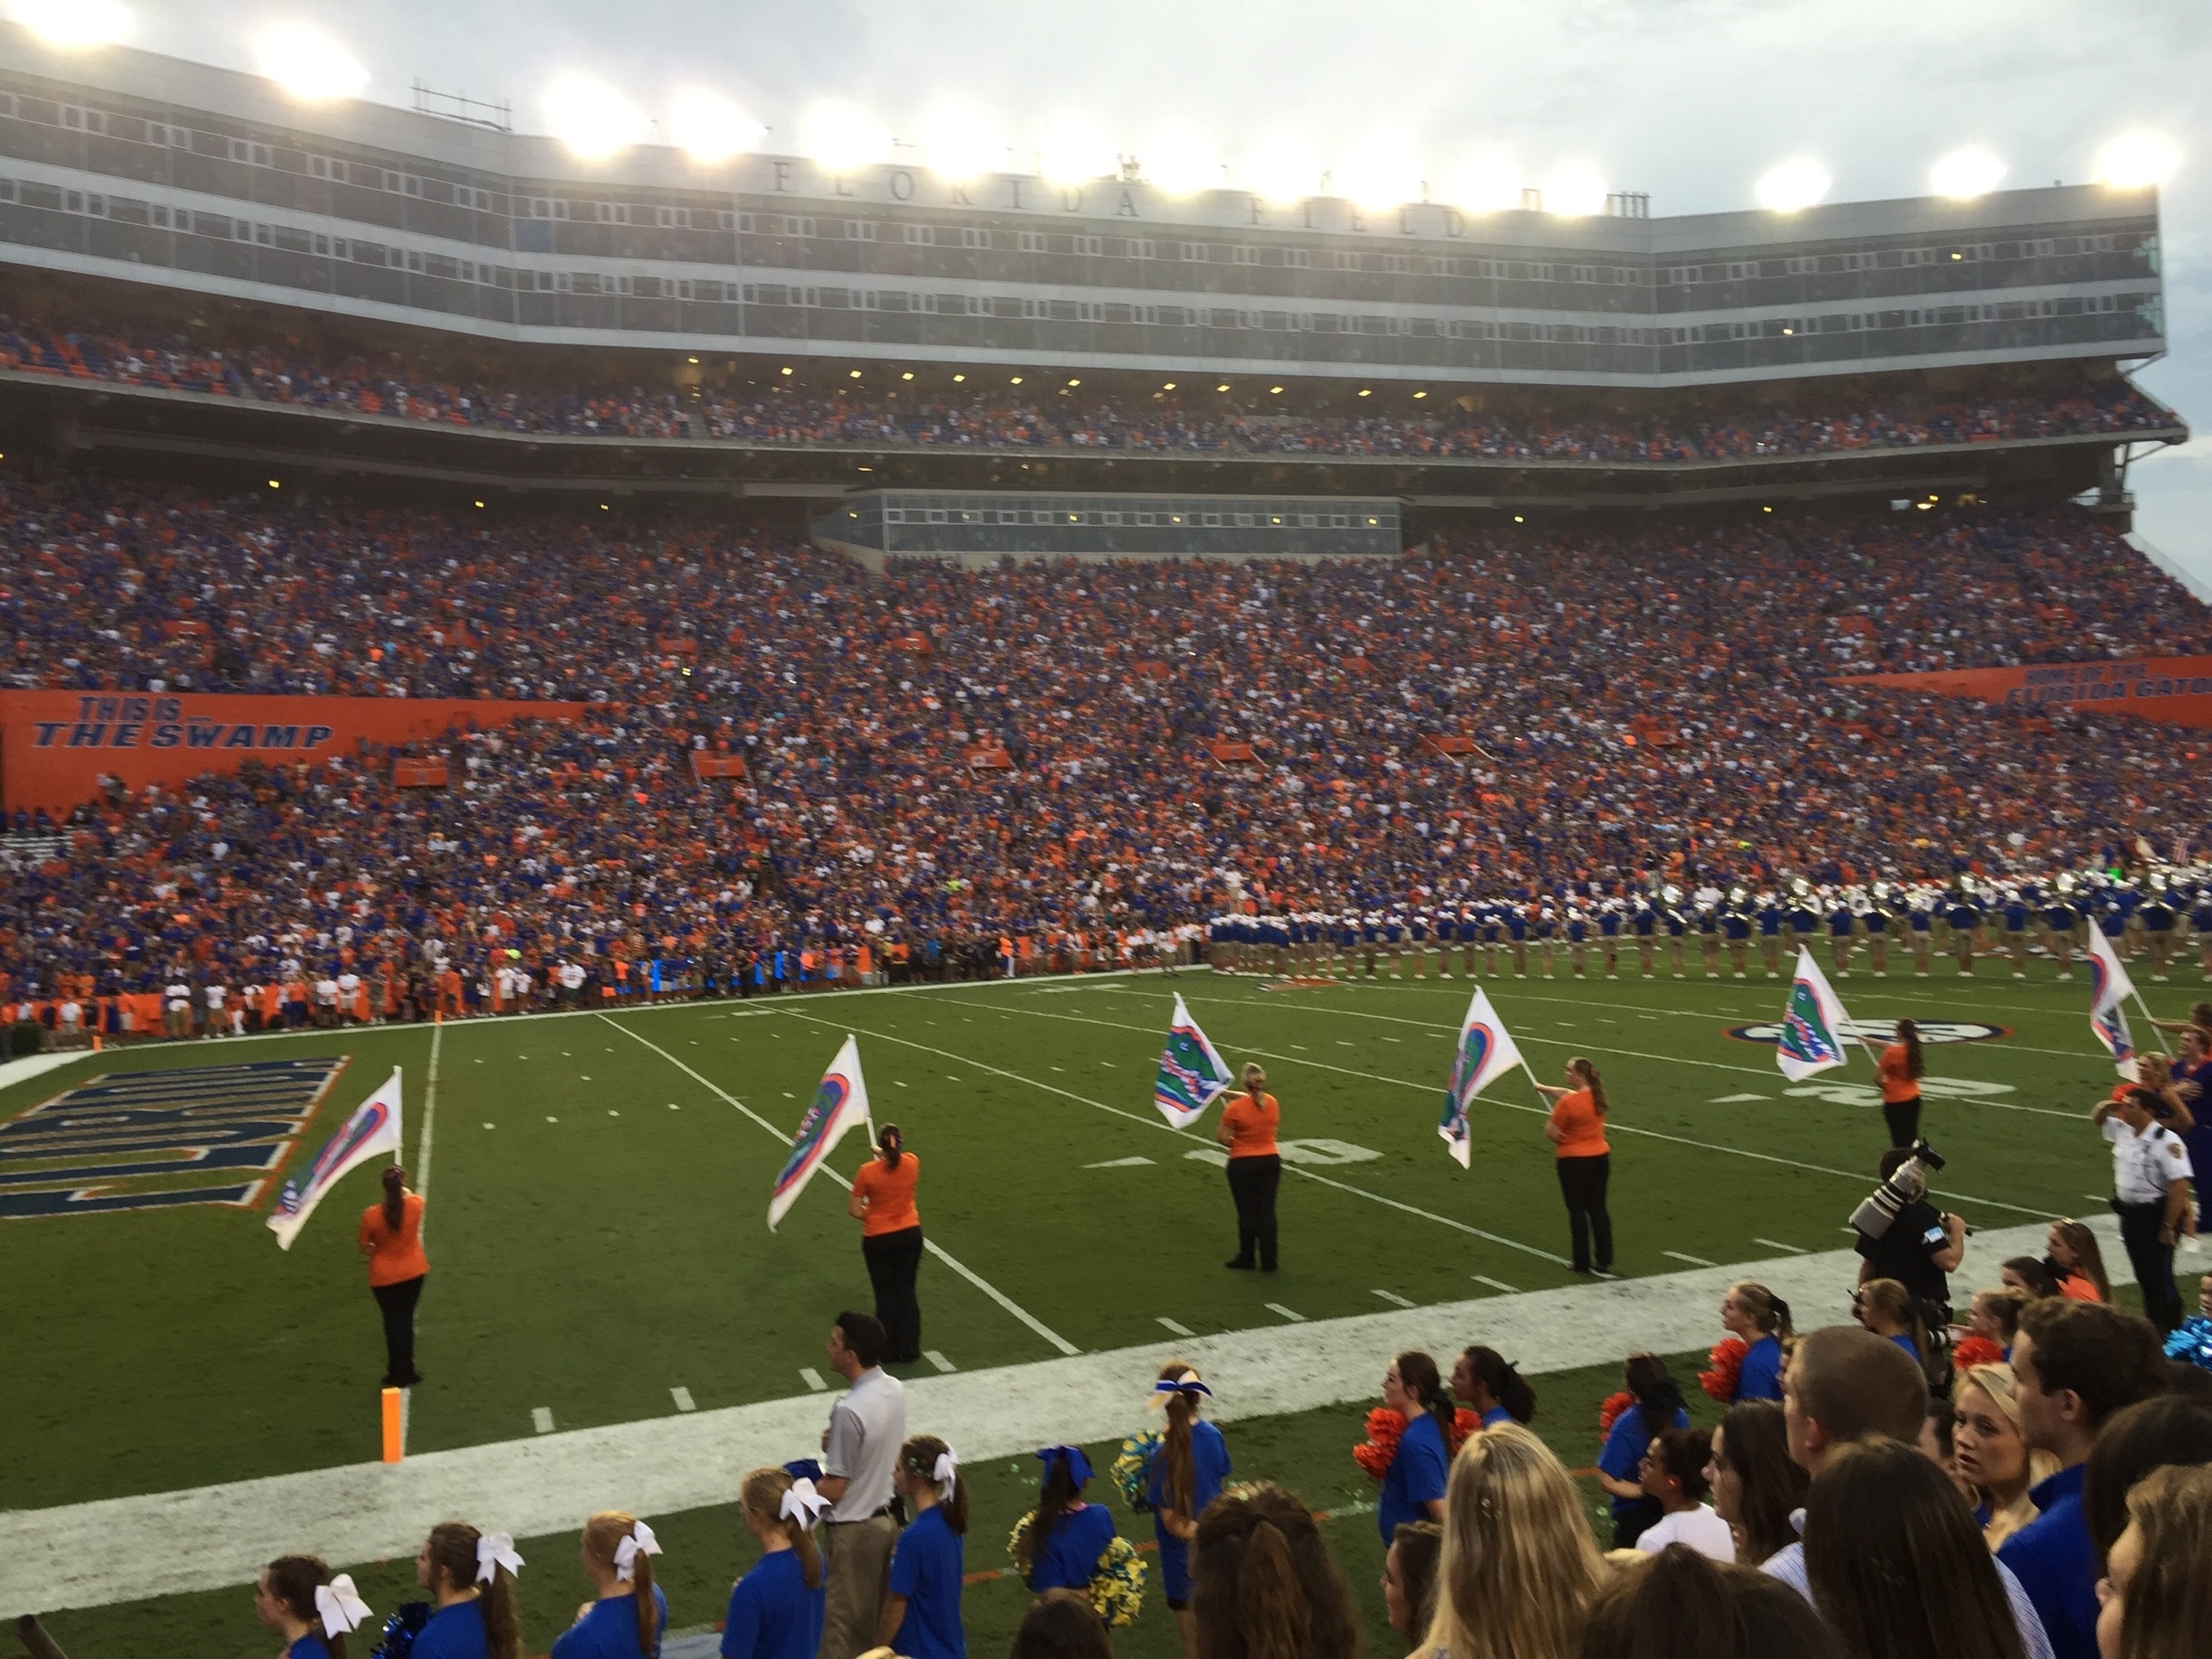 At the Gators home opener with 90,000 of my closest friends. A football game at Florida Field is an incredible experience. Energy not to be missed. This is probably one of the greatest stadiums in college football. 